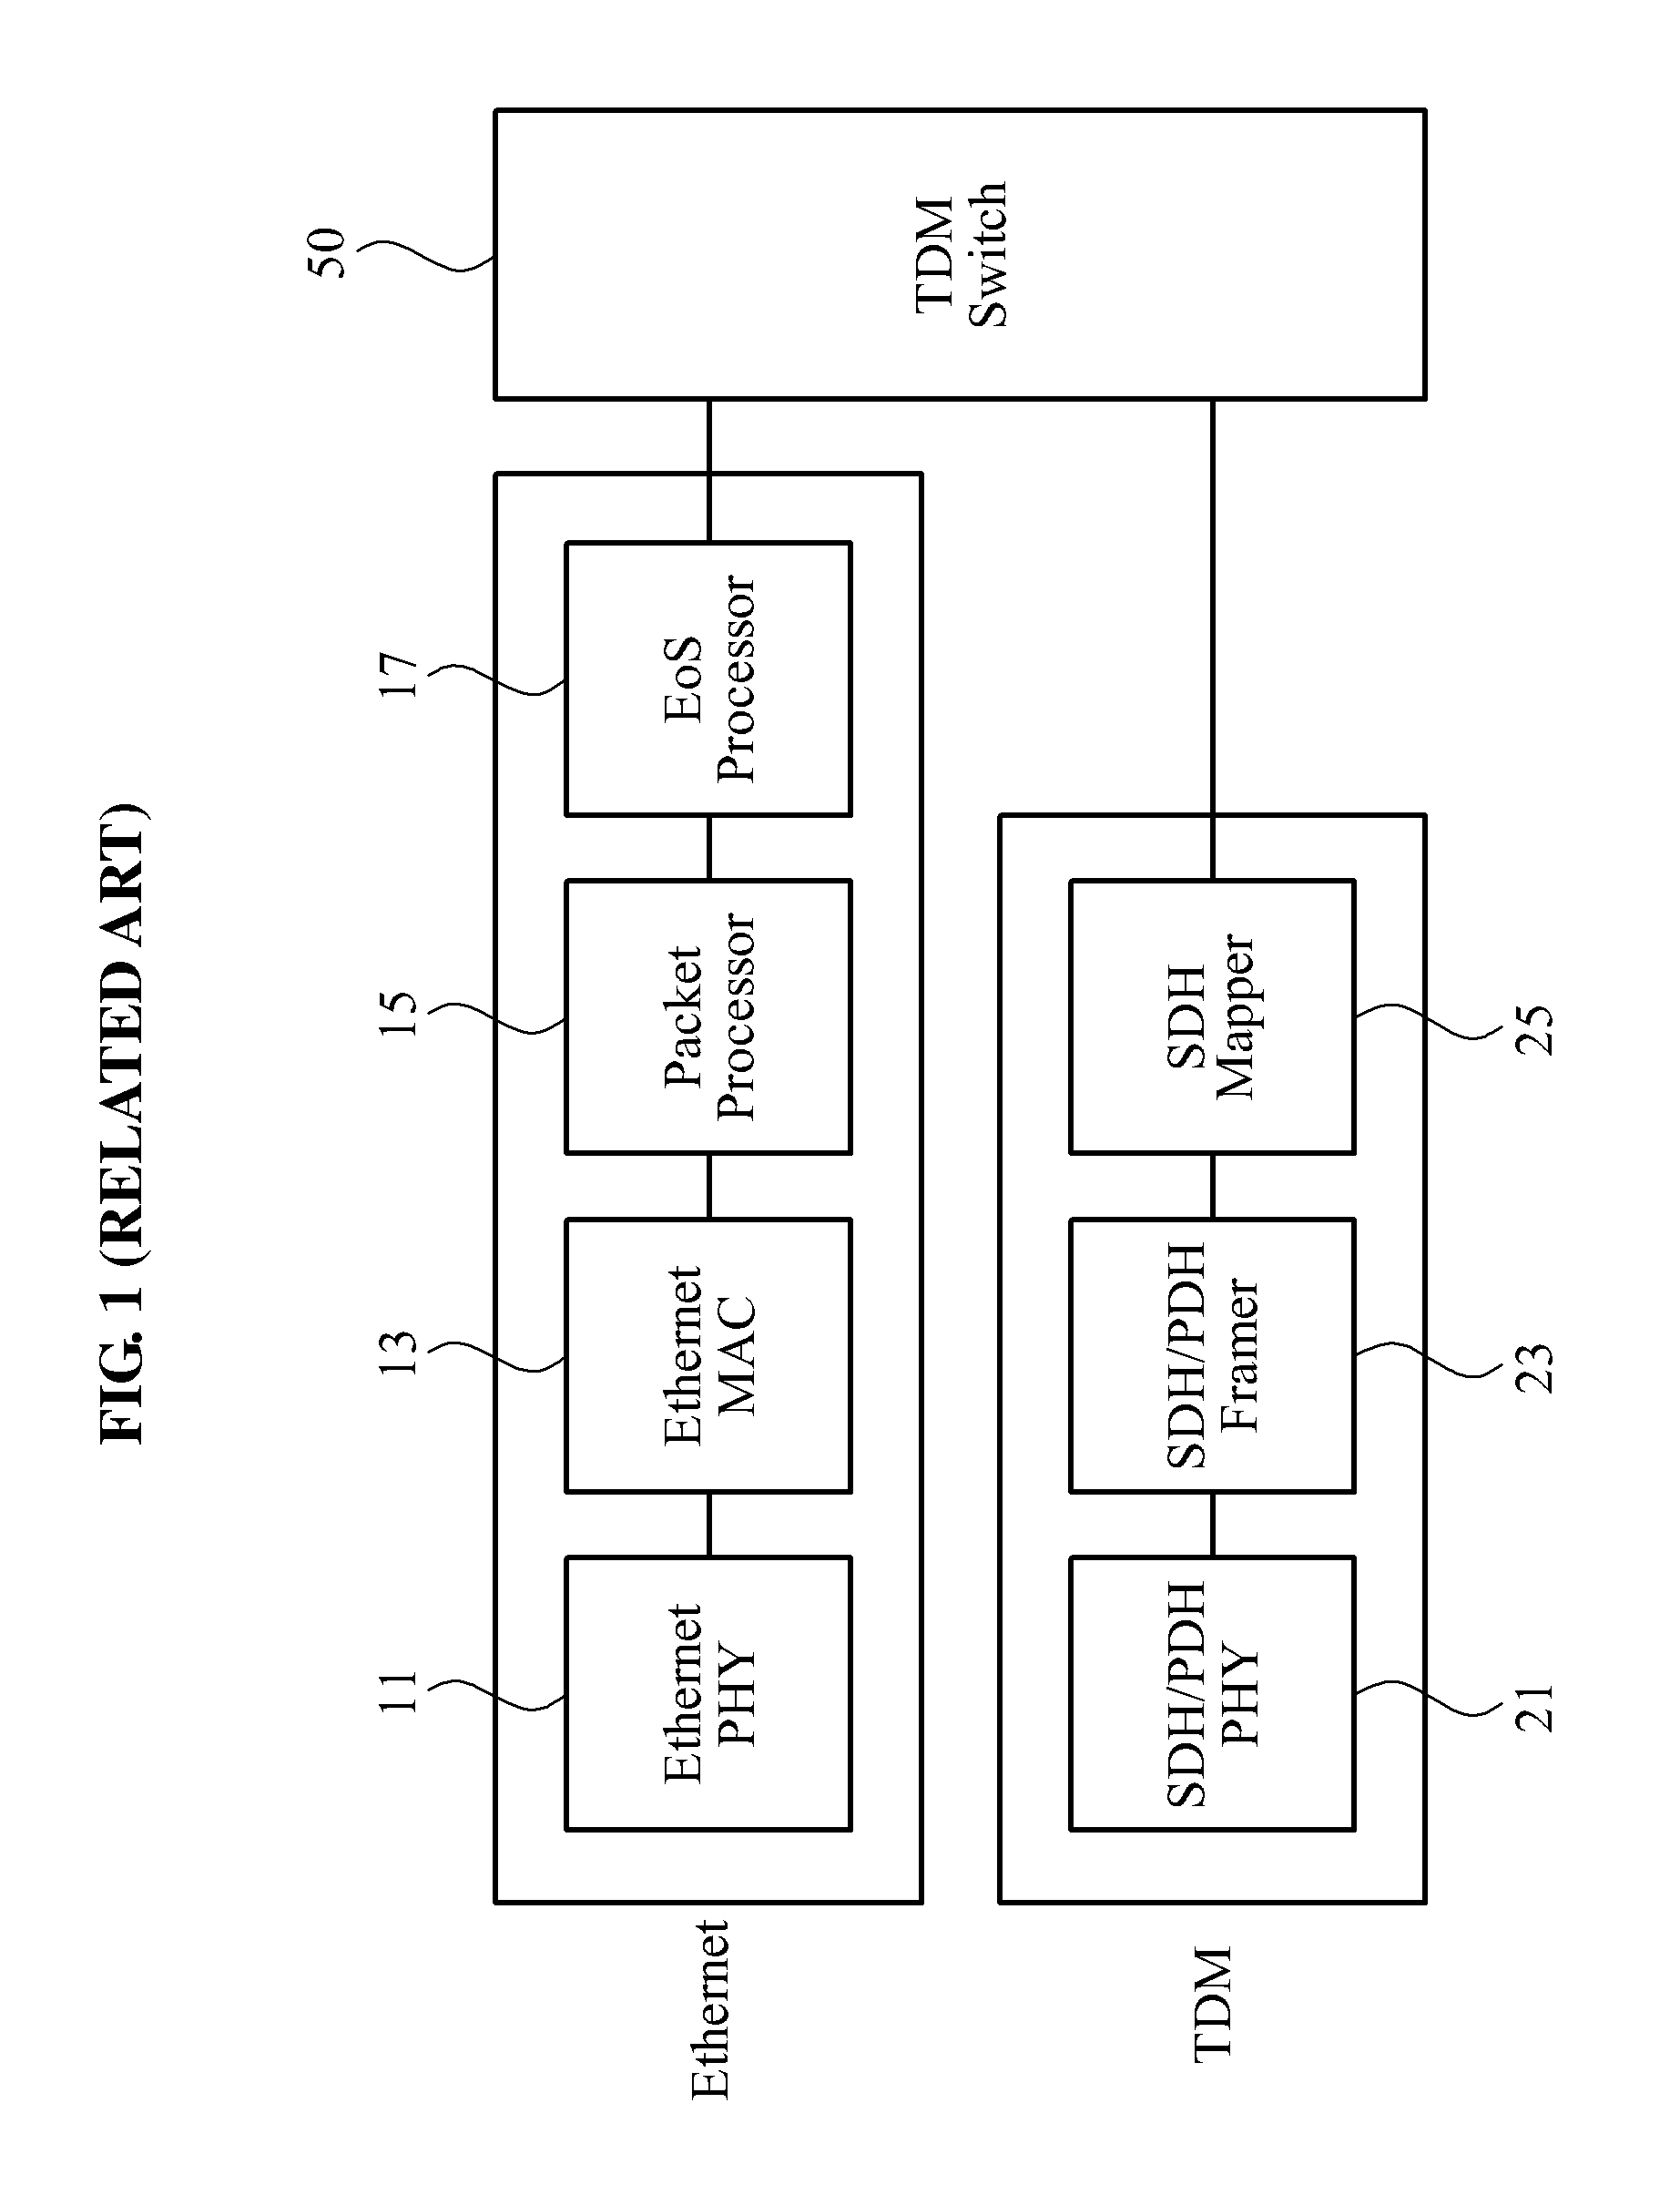 Method and apparatus for switching packet/time division multiplexing (TDM) including tdm circuit and carrier ethernet packet signal